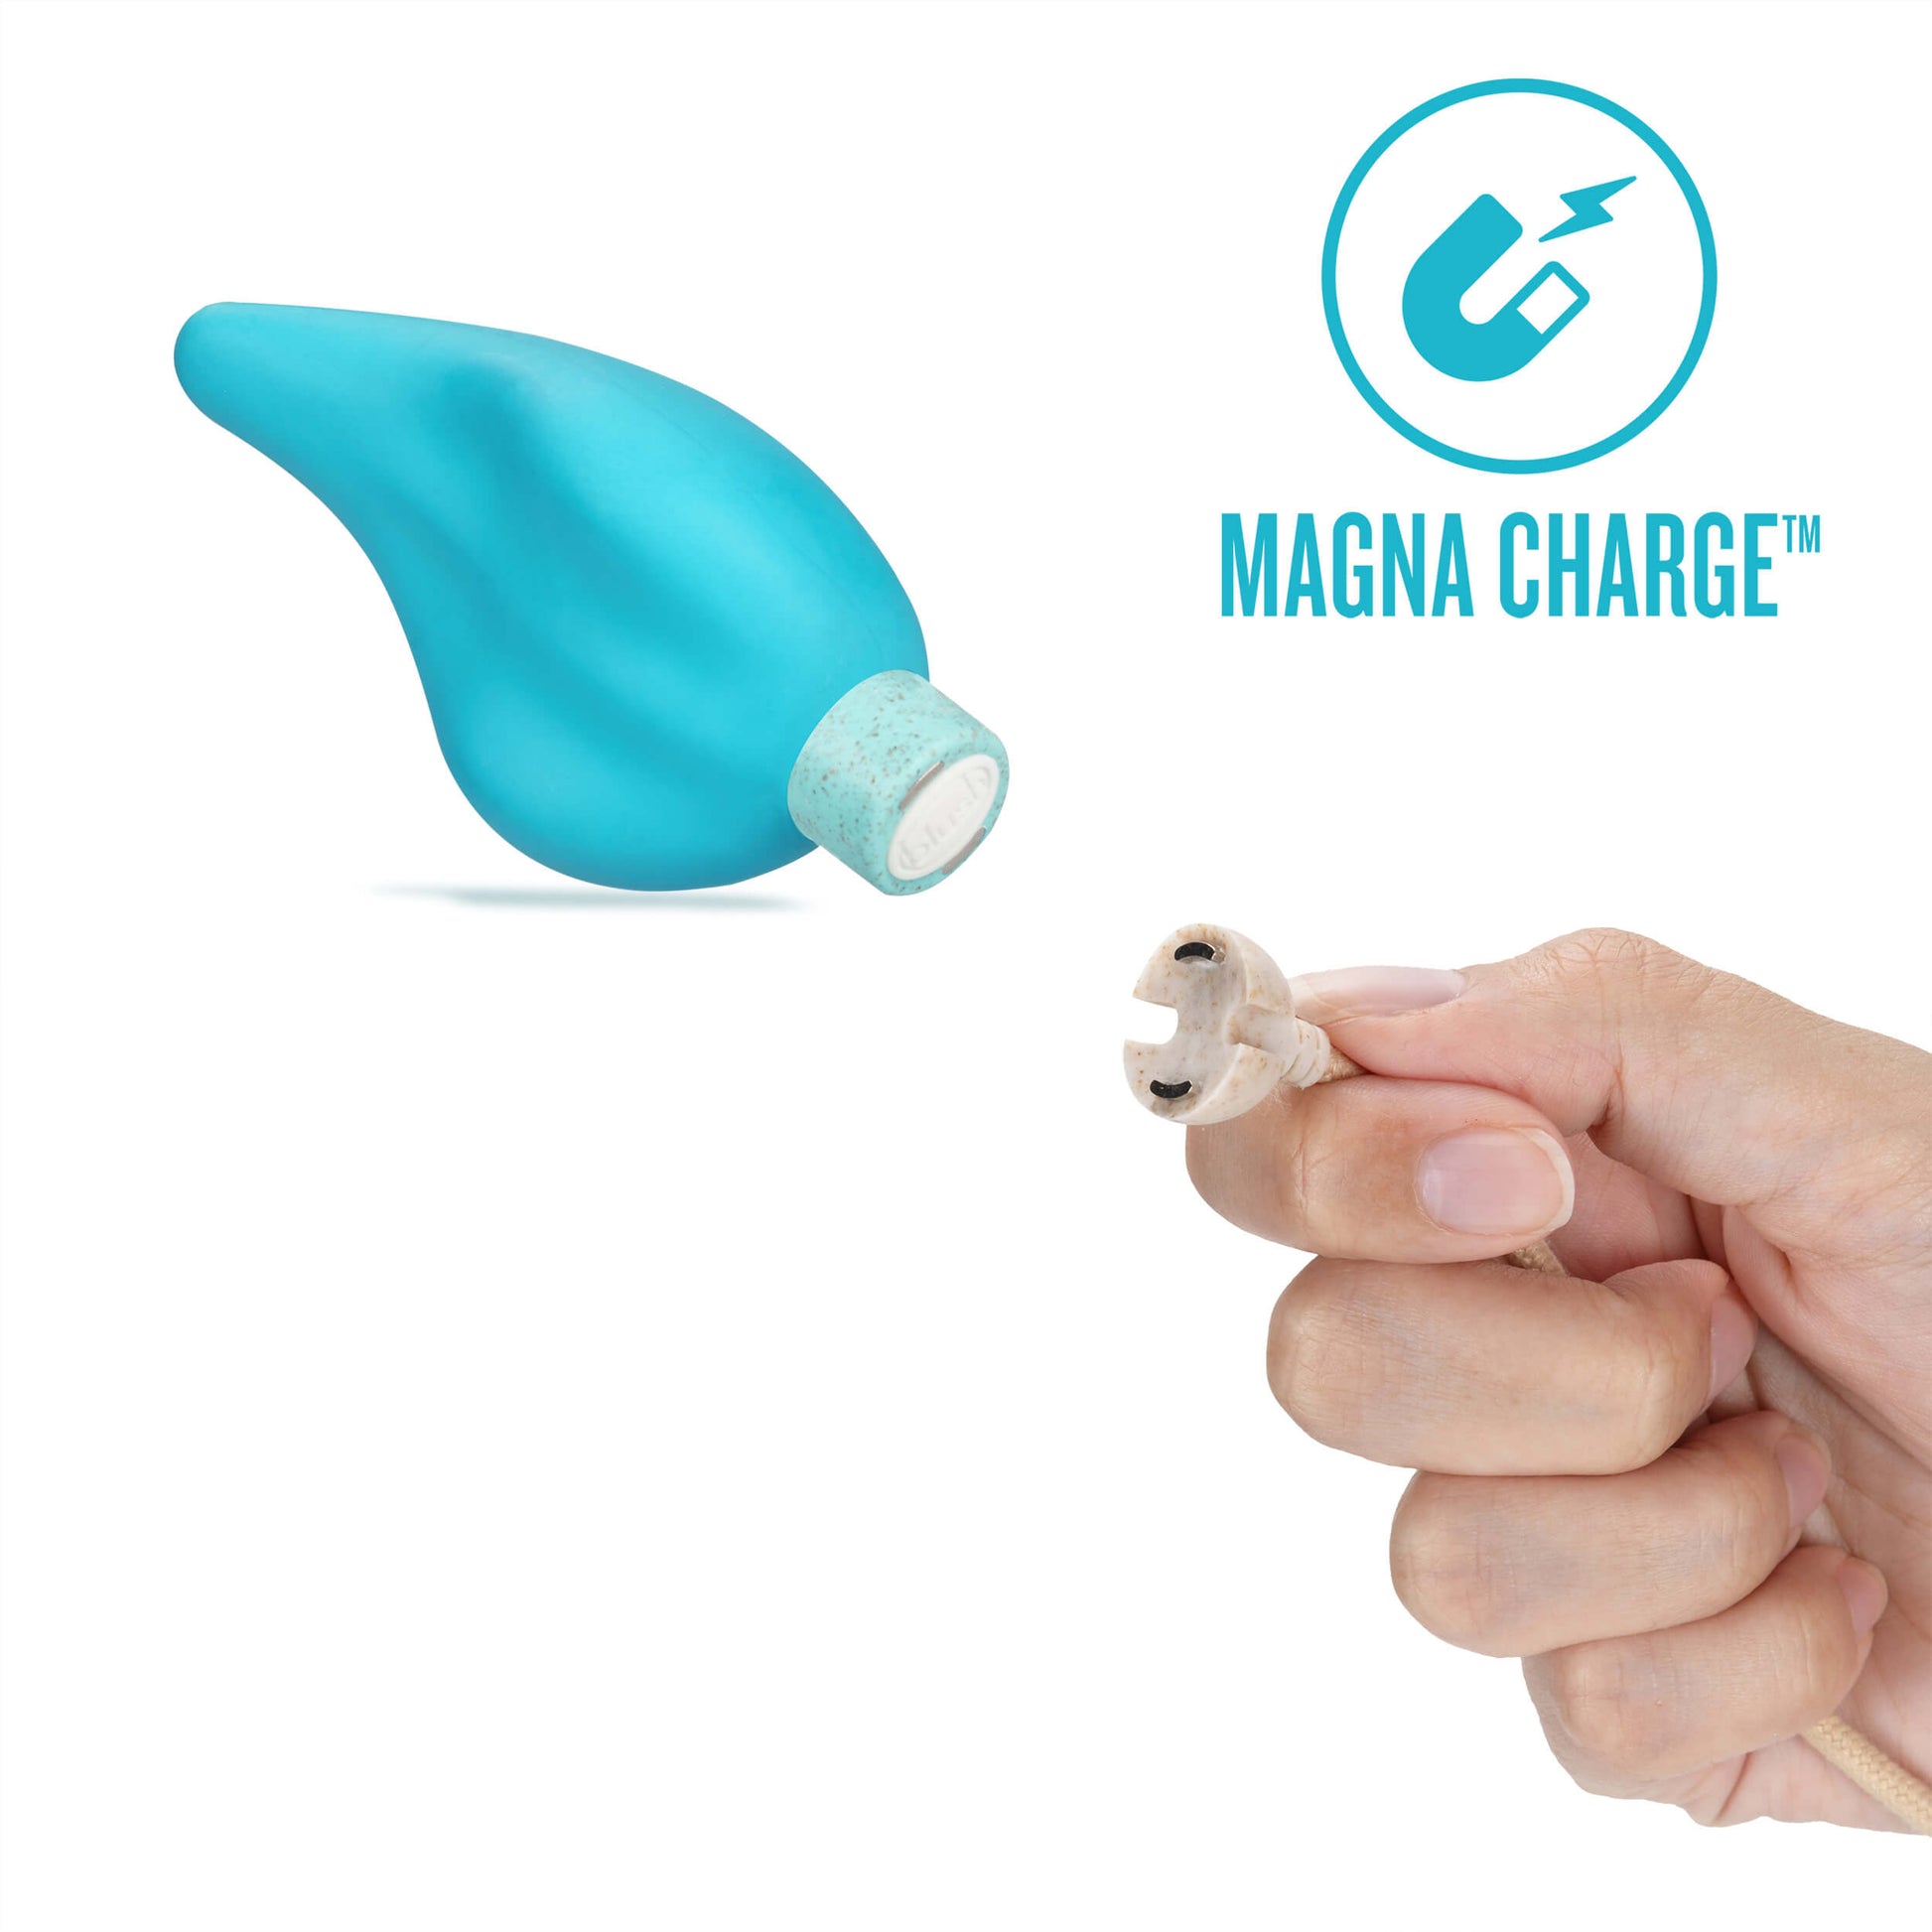 Blush Gaia Eco Caress Magna Charge - by The Bigger O online sex toy shop. USA, Canada and UK shipping available.